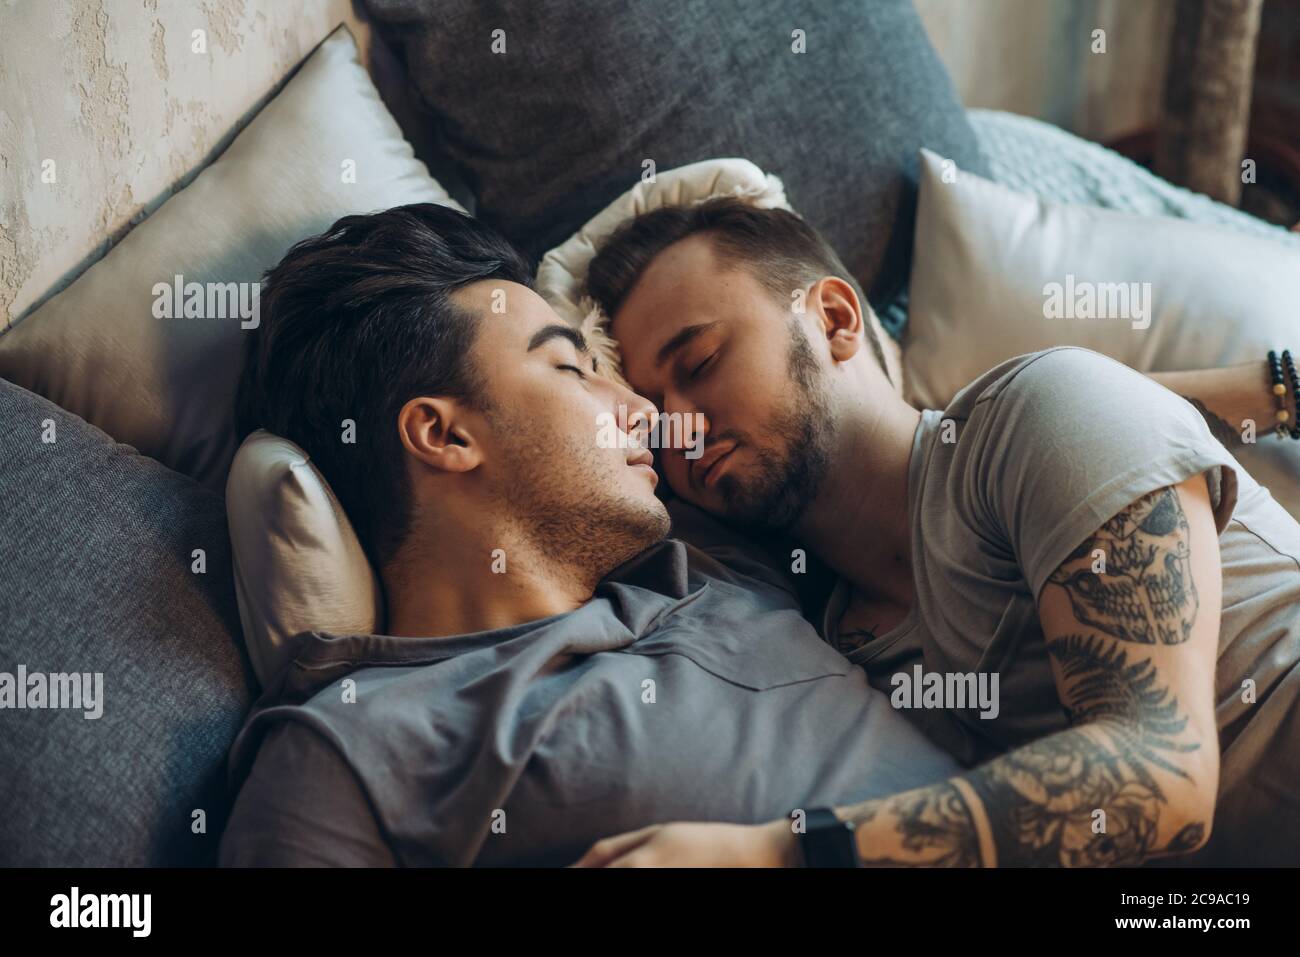 Young sweet couple have same-sex romance, embracing in bed kissing, passionate active man catches his boyfriend in caddle, honeymoon, LGBT concept Stock Photo photo